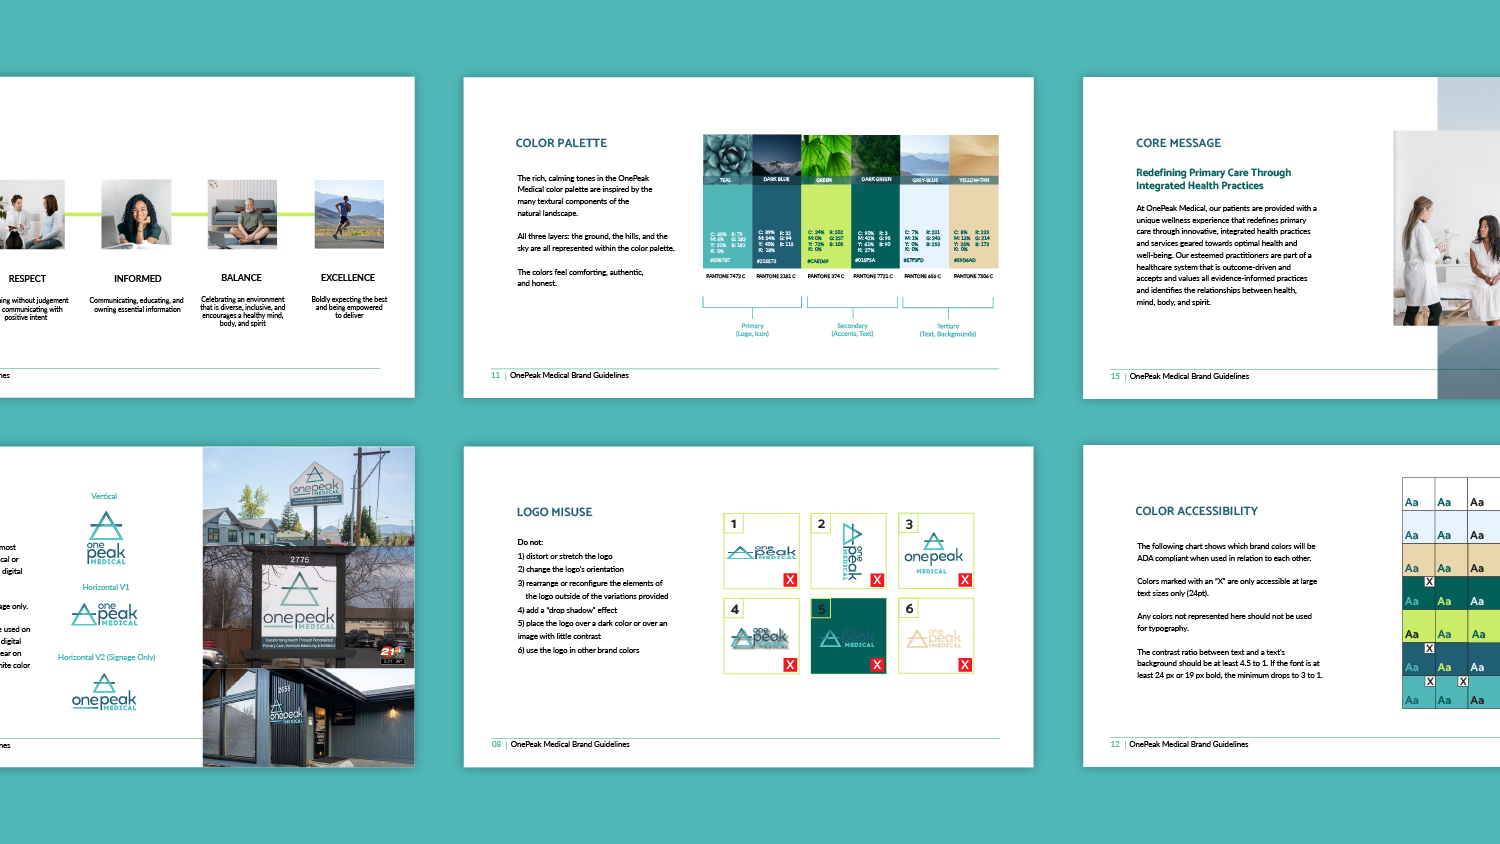 OnePeak Medical brand guidelines designed by Mad Fish Digital.